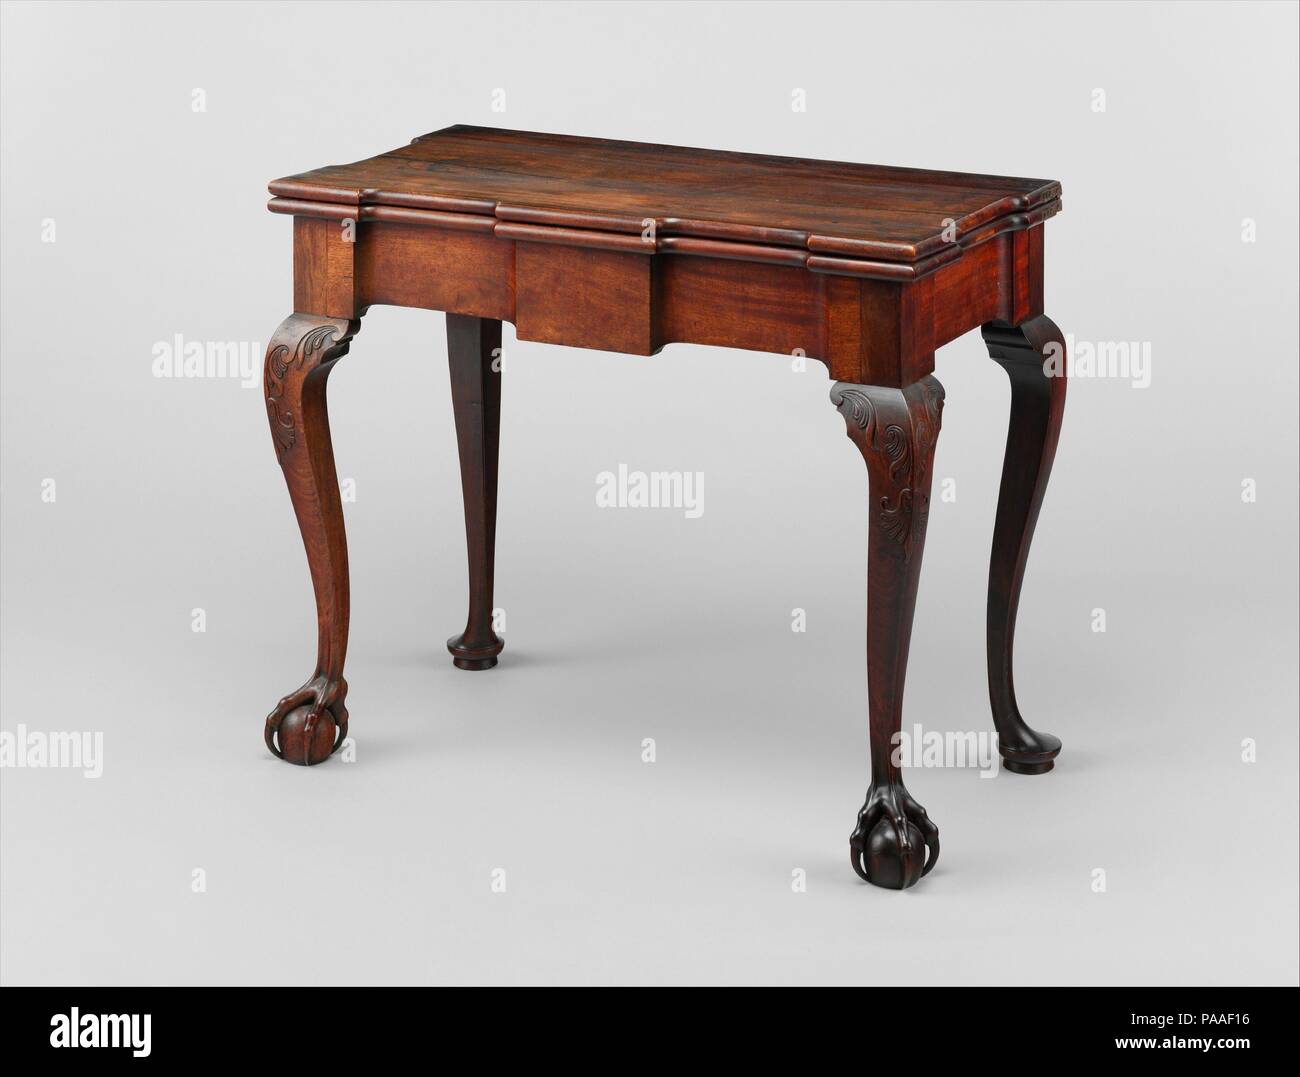 Card Table. Culture: American. Dimensions: 27 3/4 x 33 1/4 x 16 1/2 in. (70.5 x 84.5 x 41.9 cm). Maker: Attributed to John Goddard (1724-1785). Date: 1760-90.  On this exquisite exemplar of a Newport cabriole-leg card table, the various elements of the skirt board are in perfect proportion and equilibrium, the curves of the legs are altogether satisfying, and the carved bird's talons grasping the ball feet appear alive. This is poetry in wood, something only John Goddard, of all the Newport makers, could on occasion achieve. Museum: Metropolitan Museum of Art, New York, USA. Stock Photo